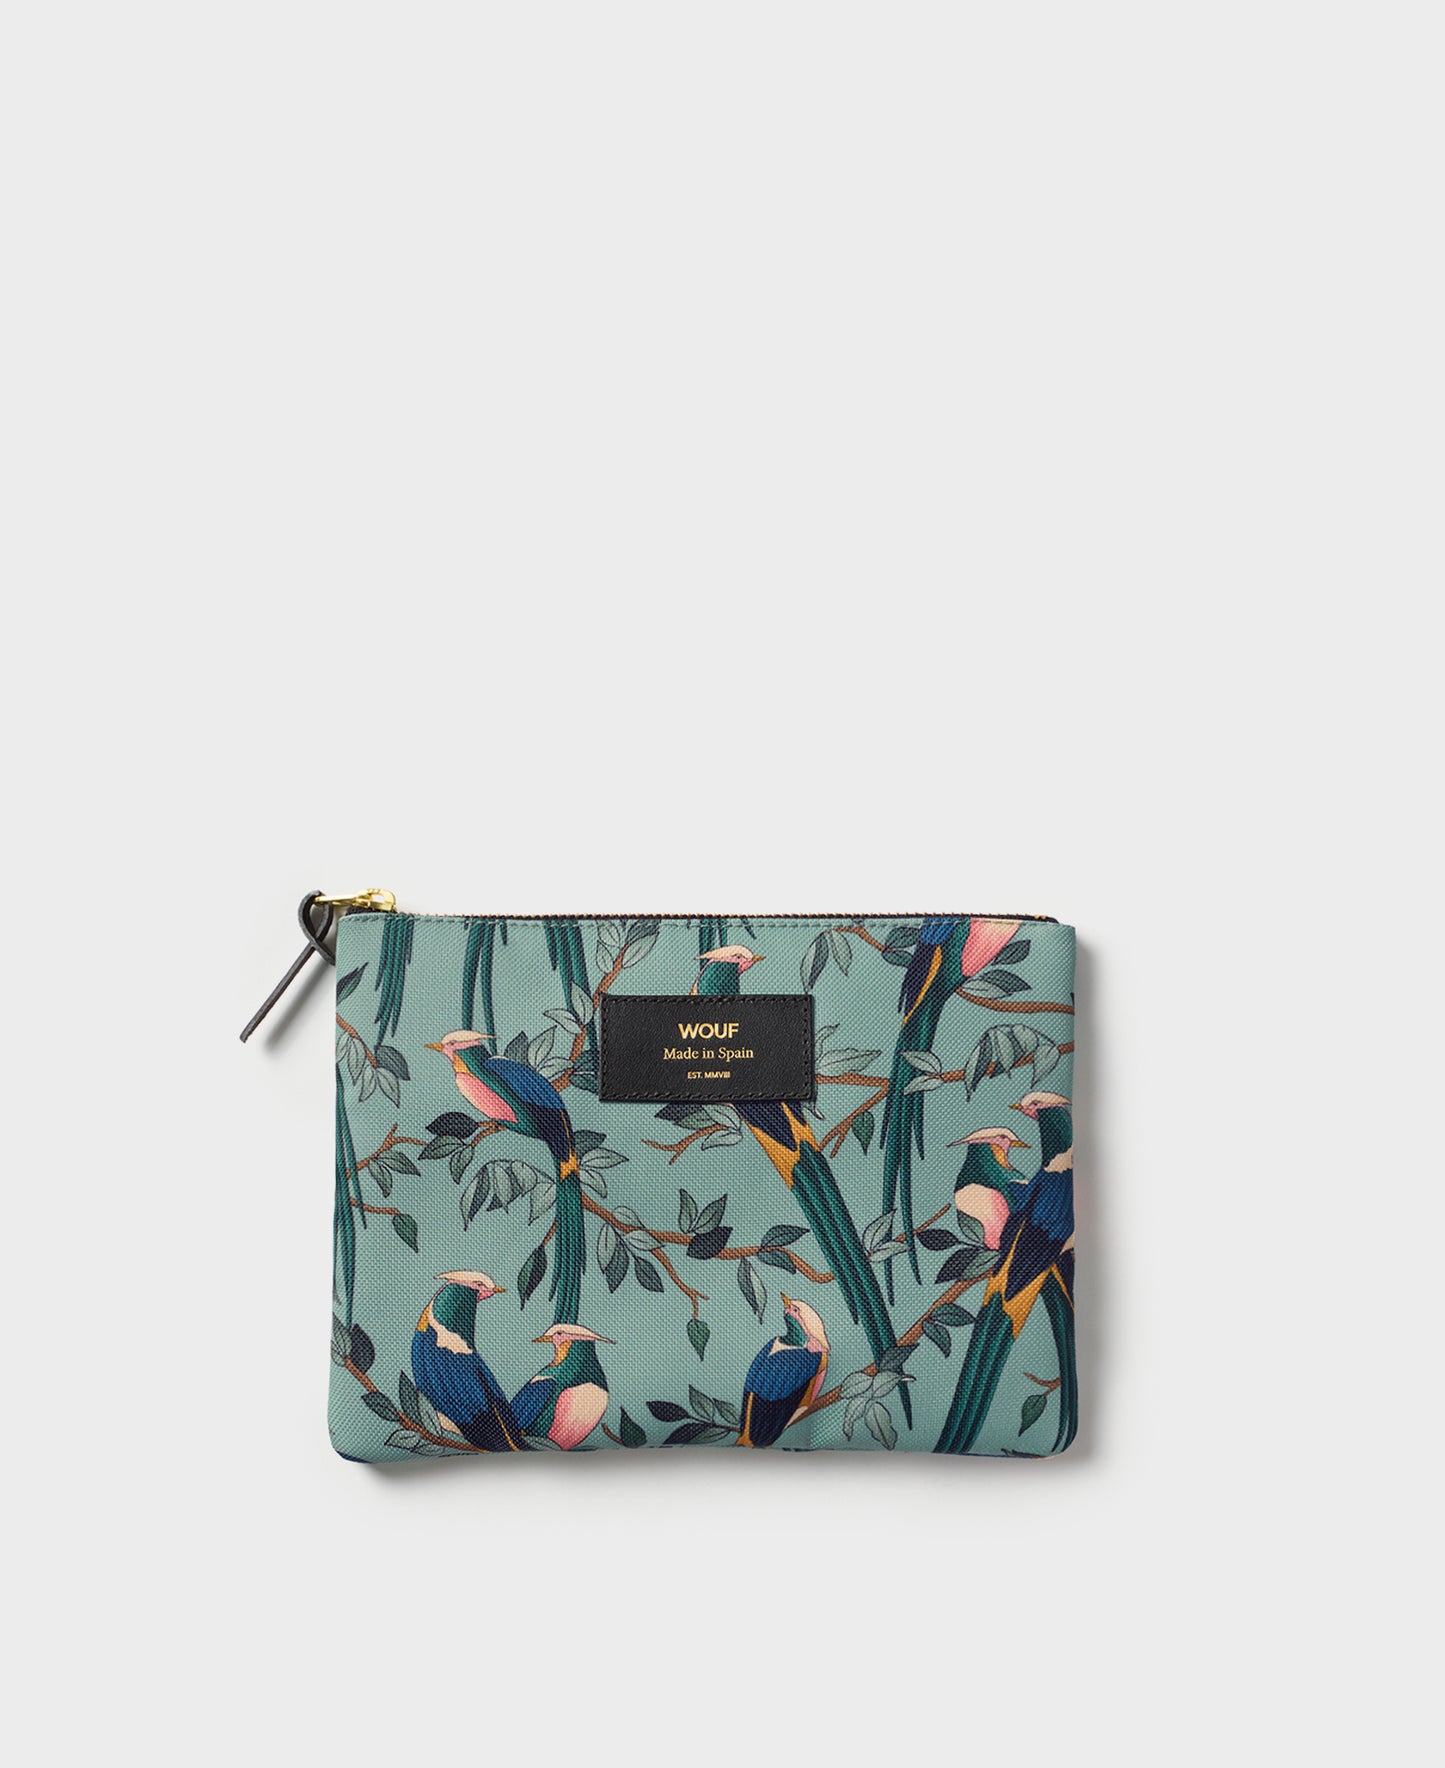 Large Pouch - Suzanne | WOUF